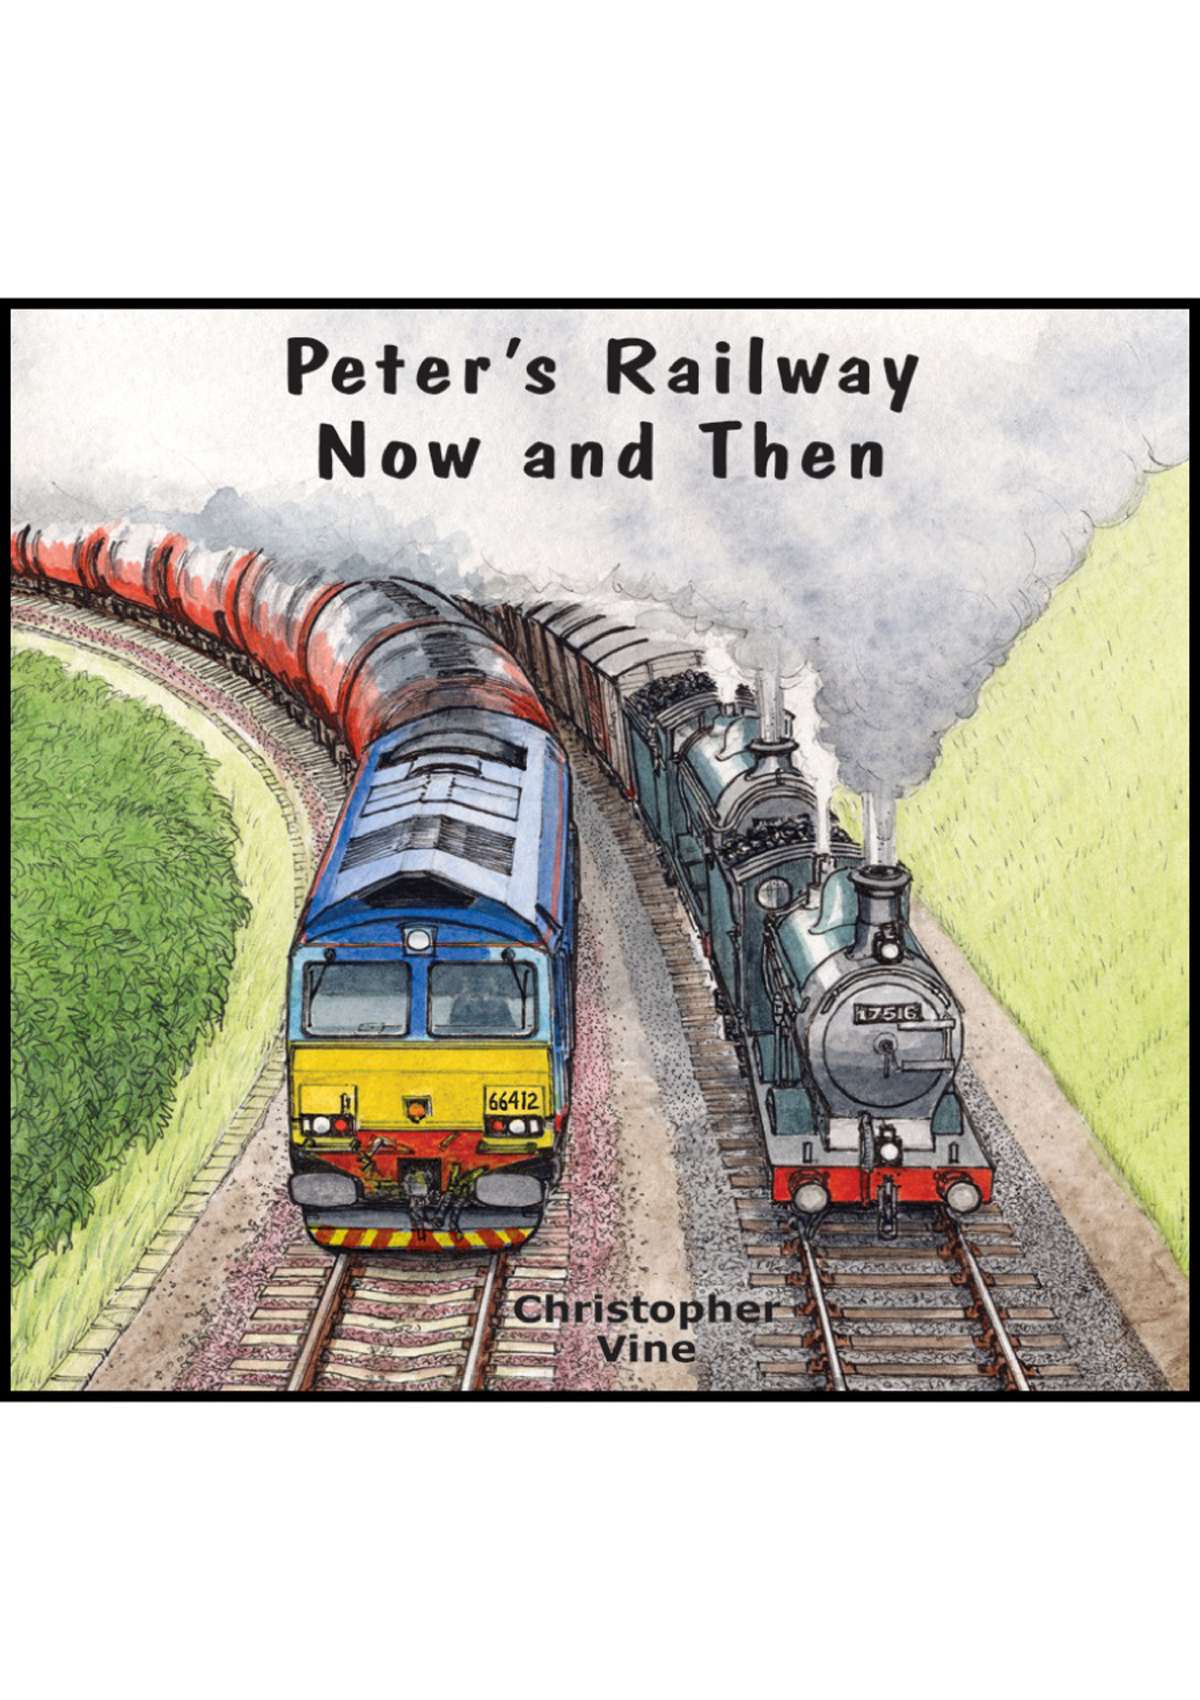 Peter's Railway - Now and Then